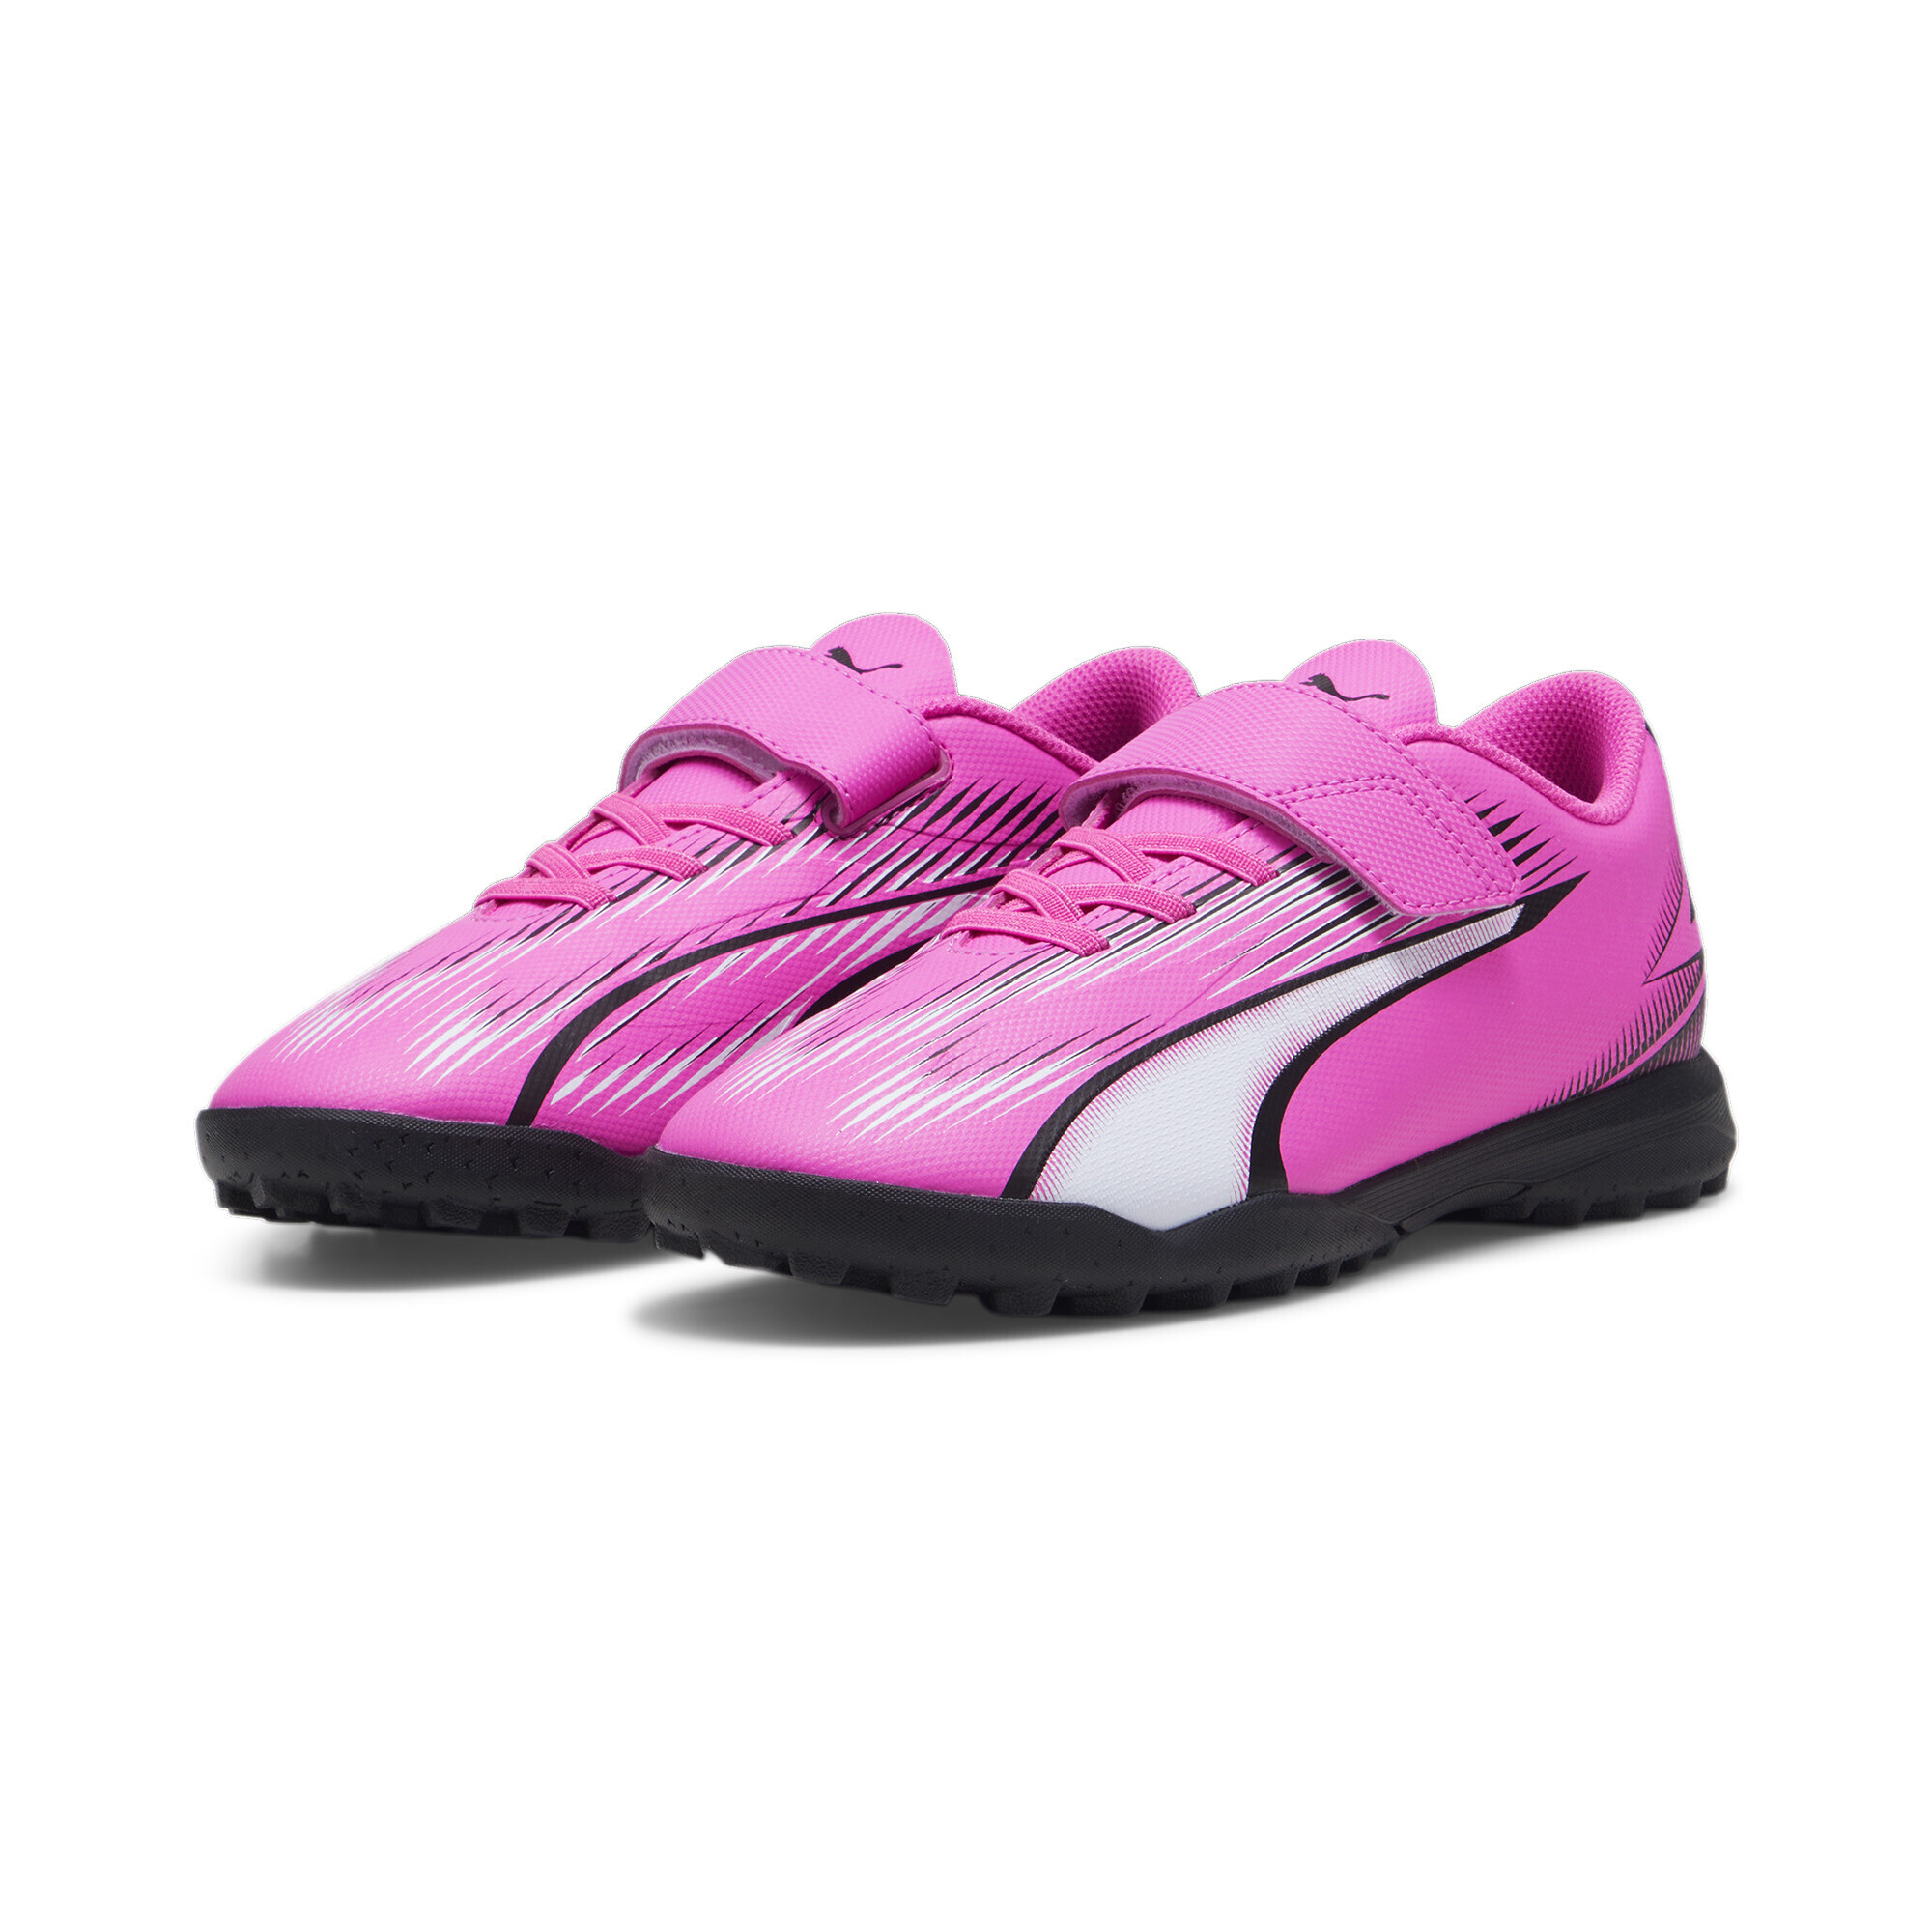 PUMA ULTRA PLAY TT Youth Football Boots In Pink, Size EU 32